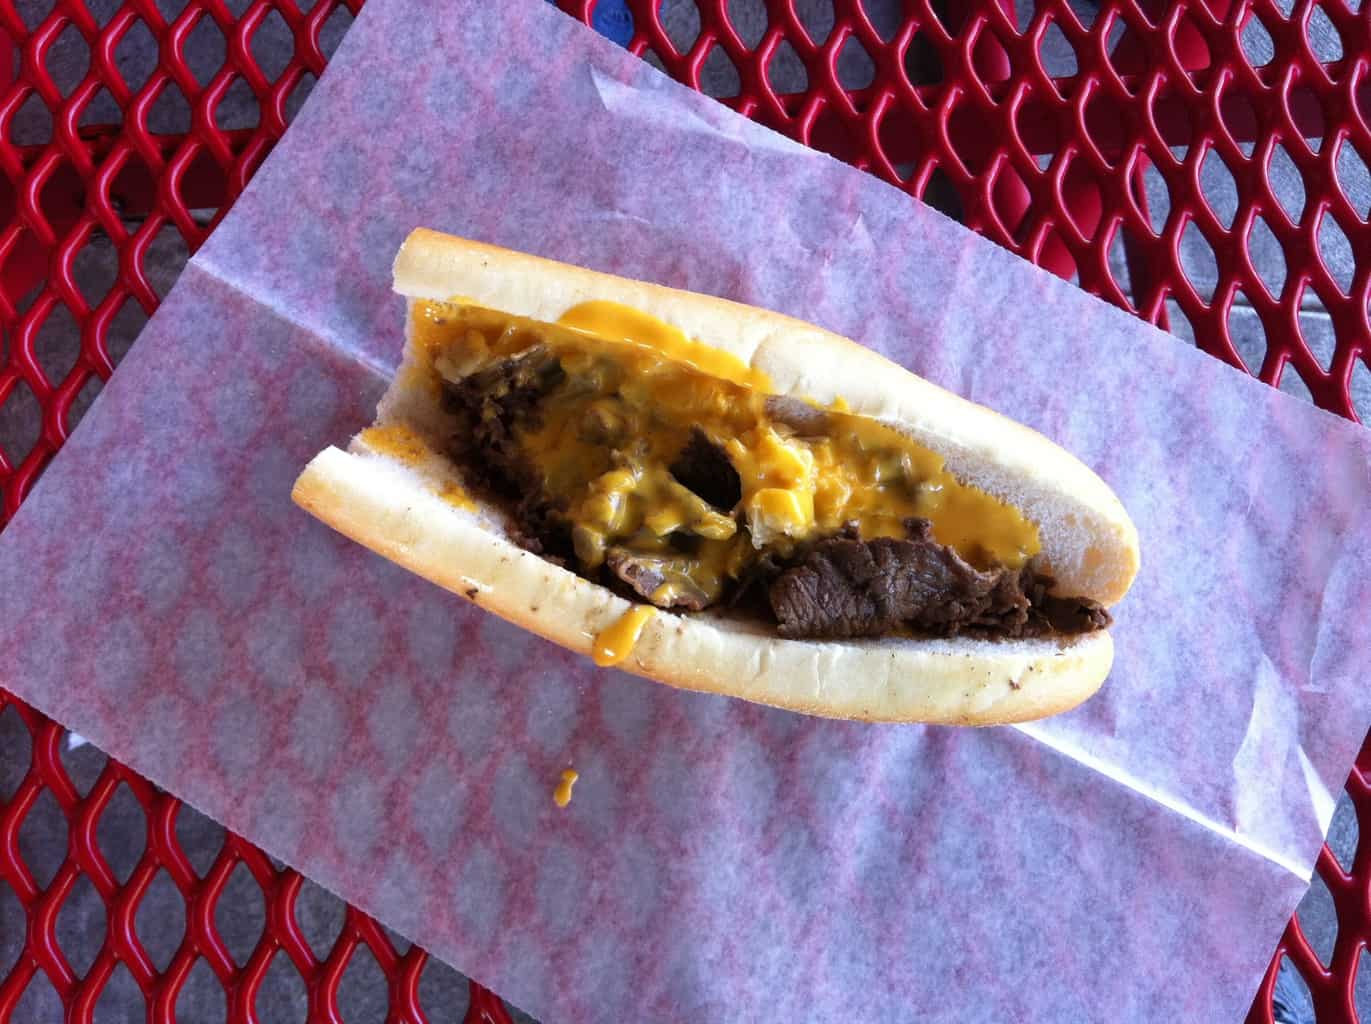 It's the battle of the cheese steak, week two! This one has to be one of the loudest debates - Pat's Vs. Geno's!